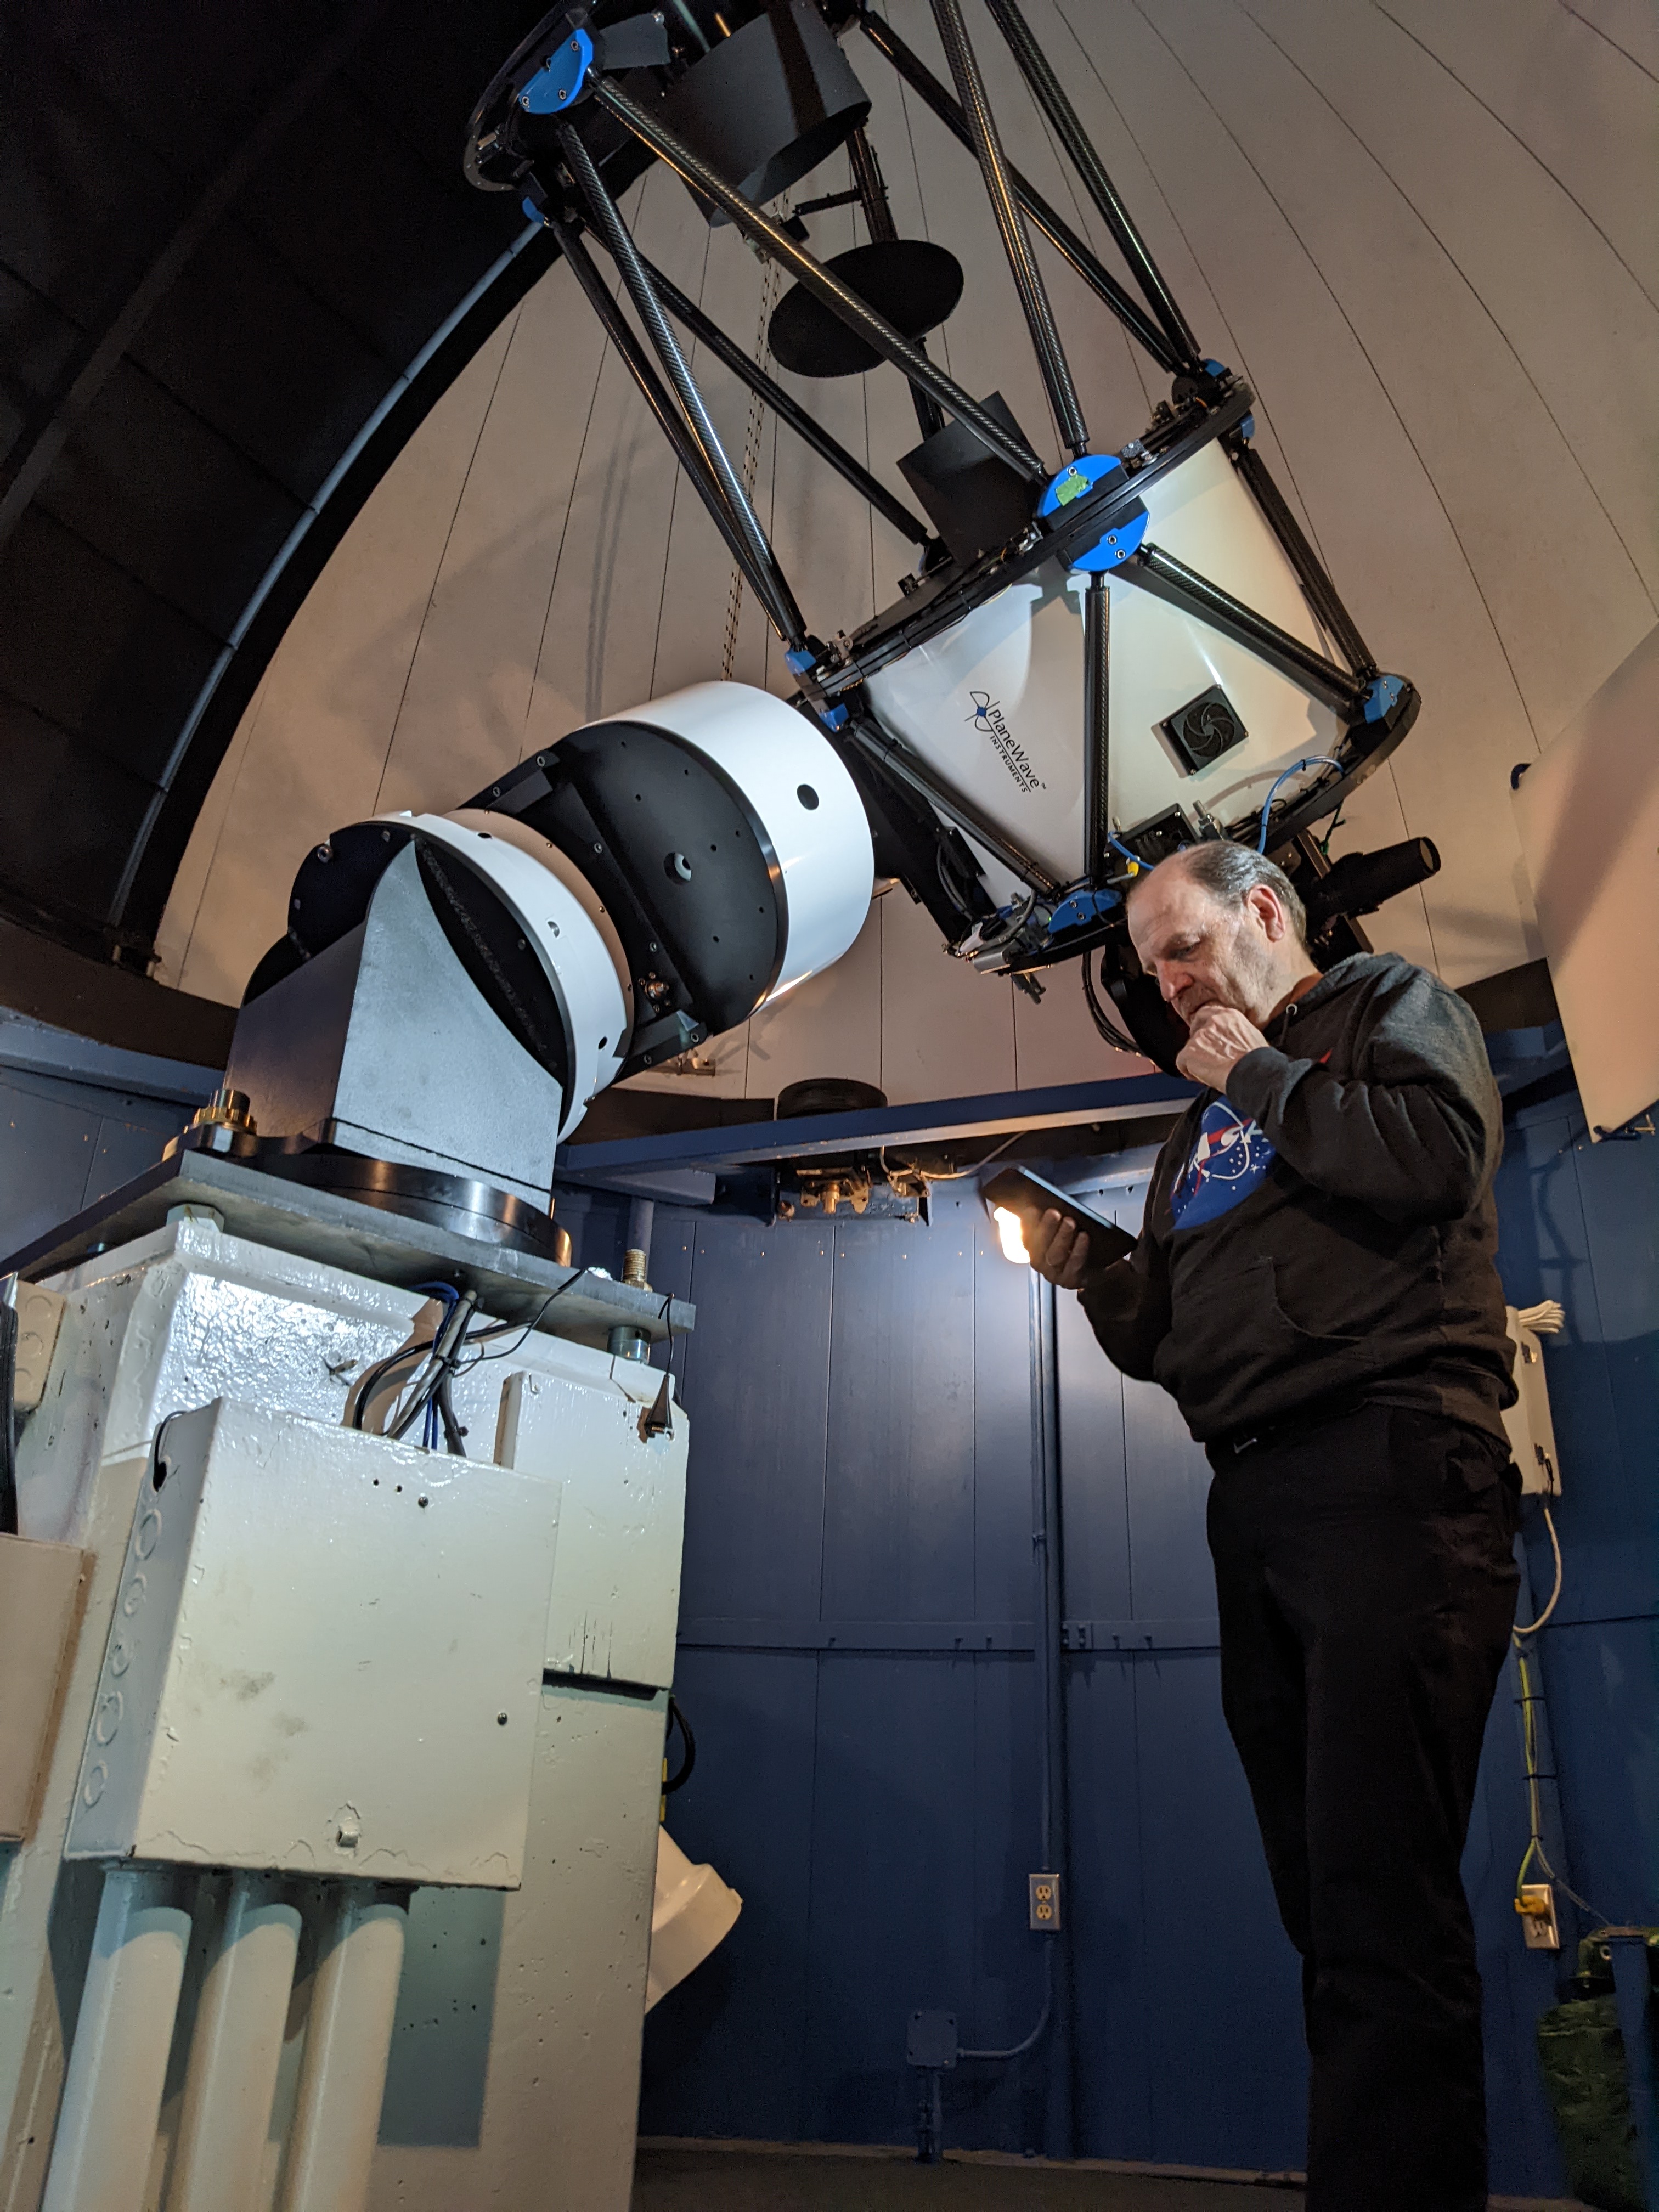 Image from inside the BGO dome, Dave is looking at his phone while standing underneath the telescope.